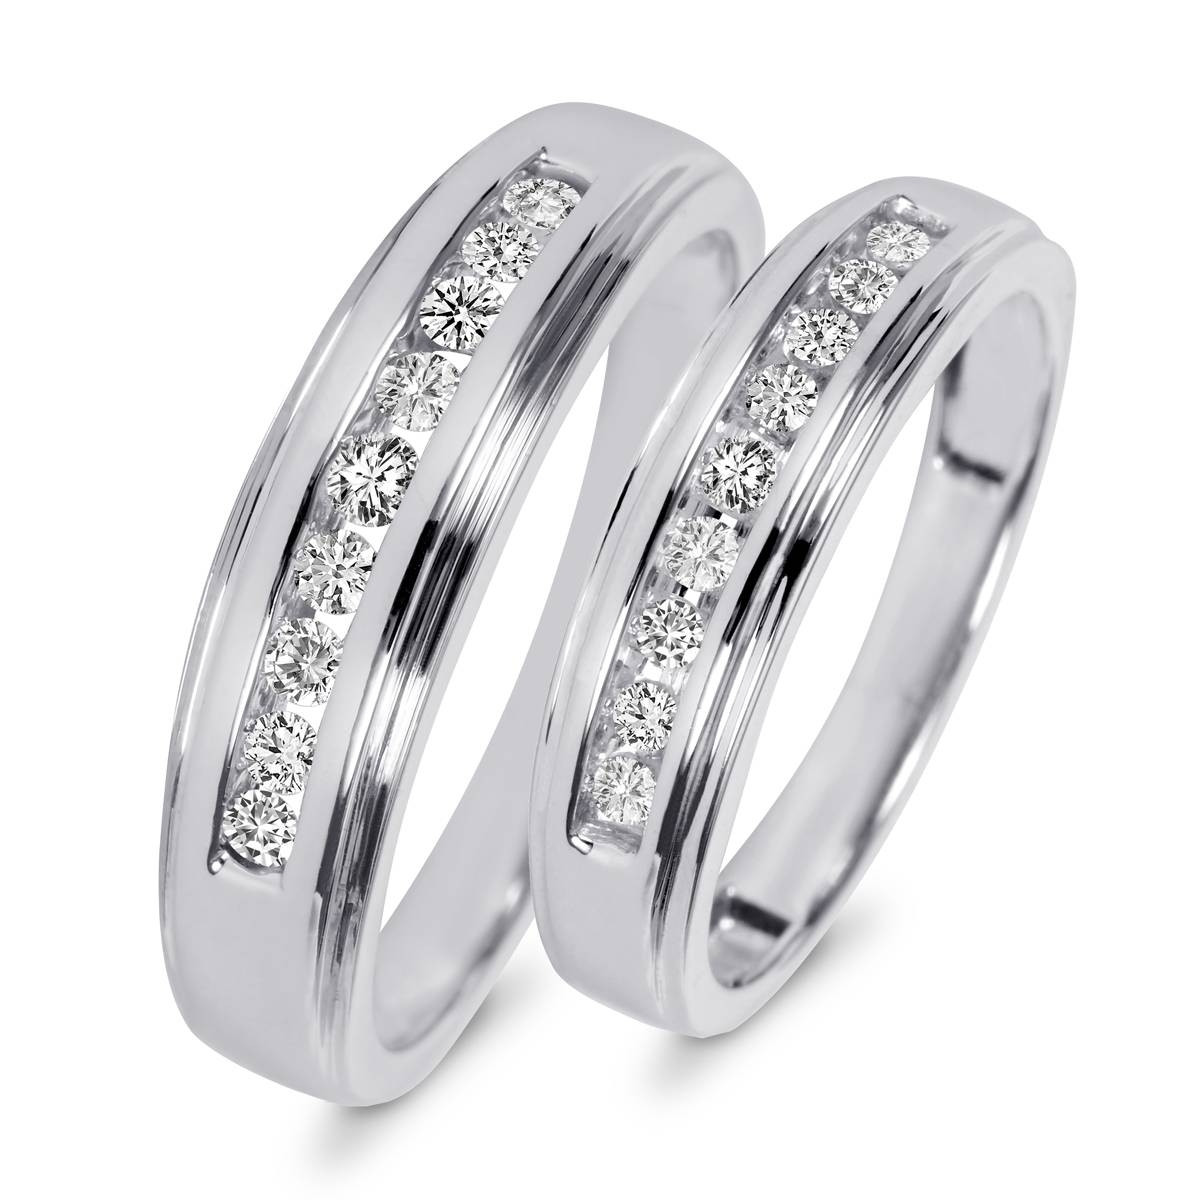 Wedding Band Sets Cheap
 15 Inspirations of Cheap Wedding Bands Sets His And Hers